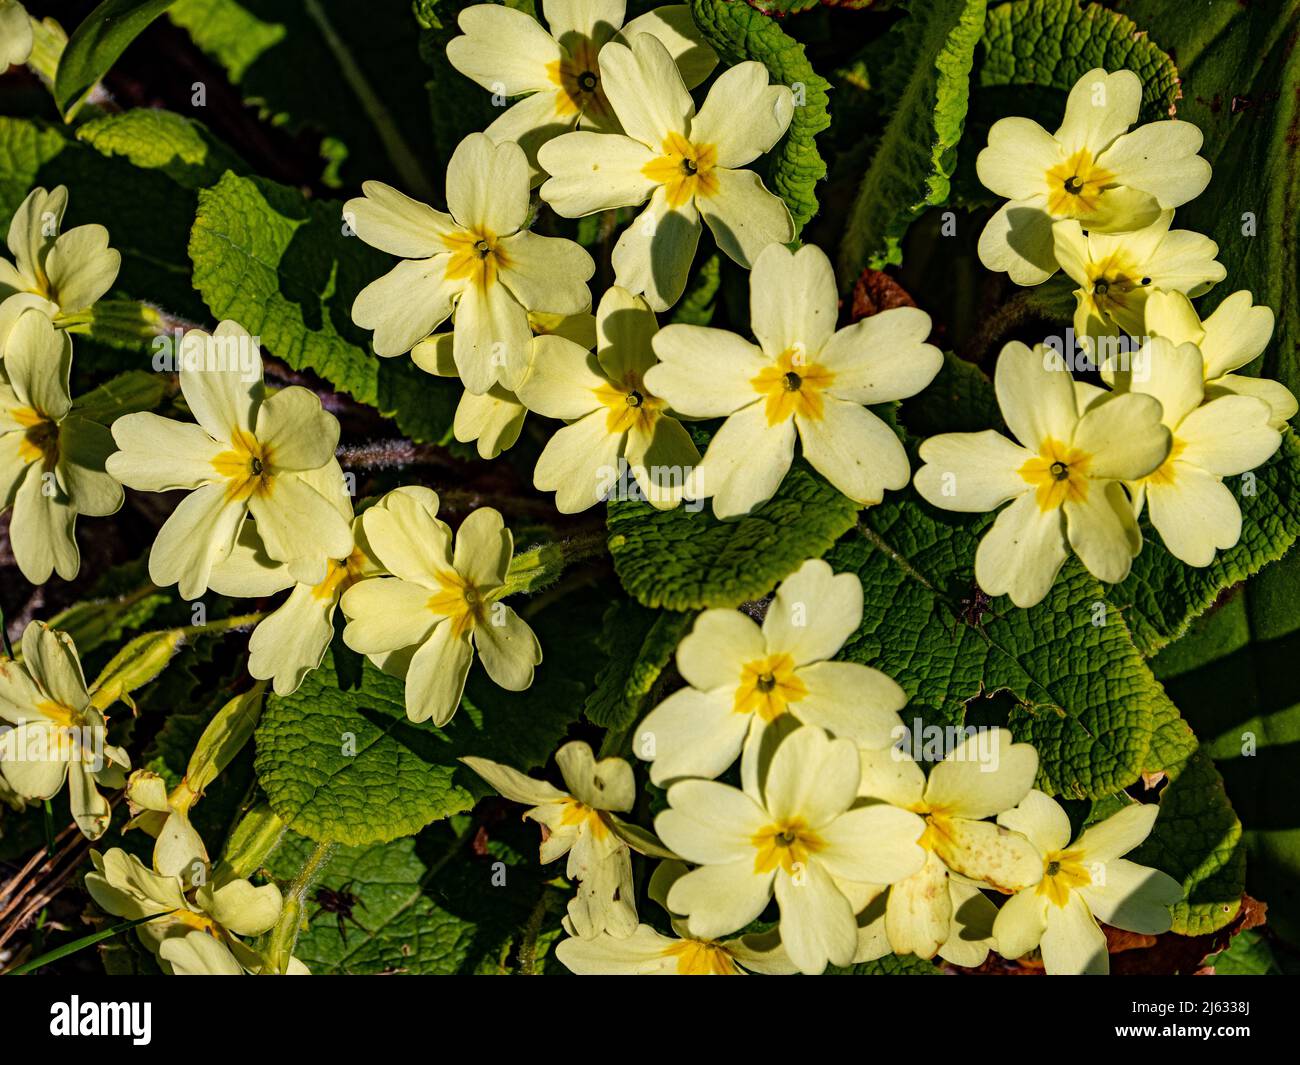 Primula blossoms herald the arrival of Spring (Sosuthampton, England) Stock Photo